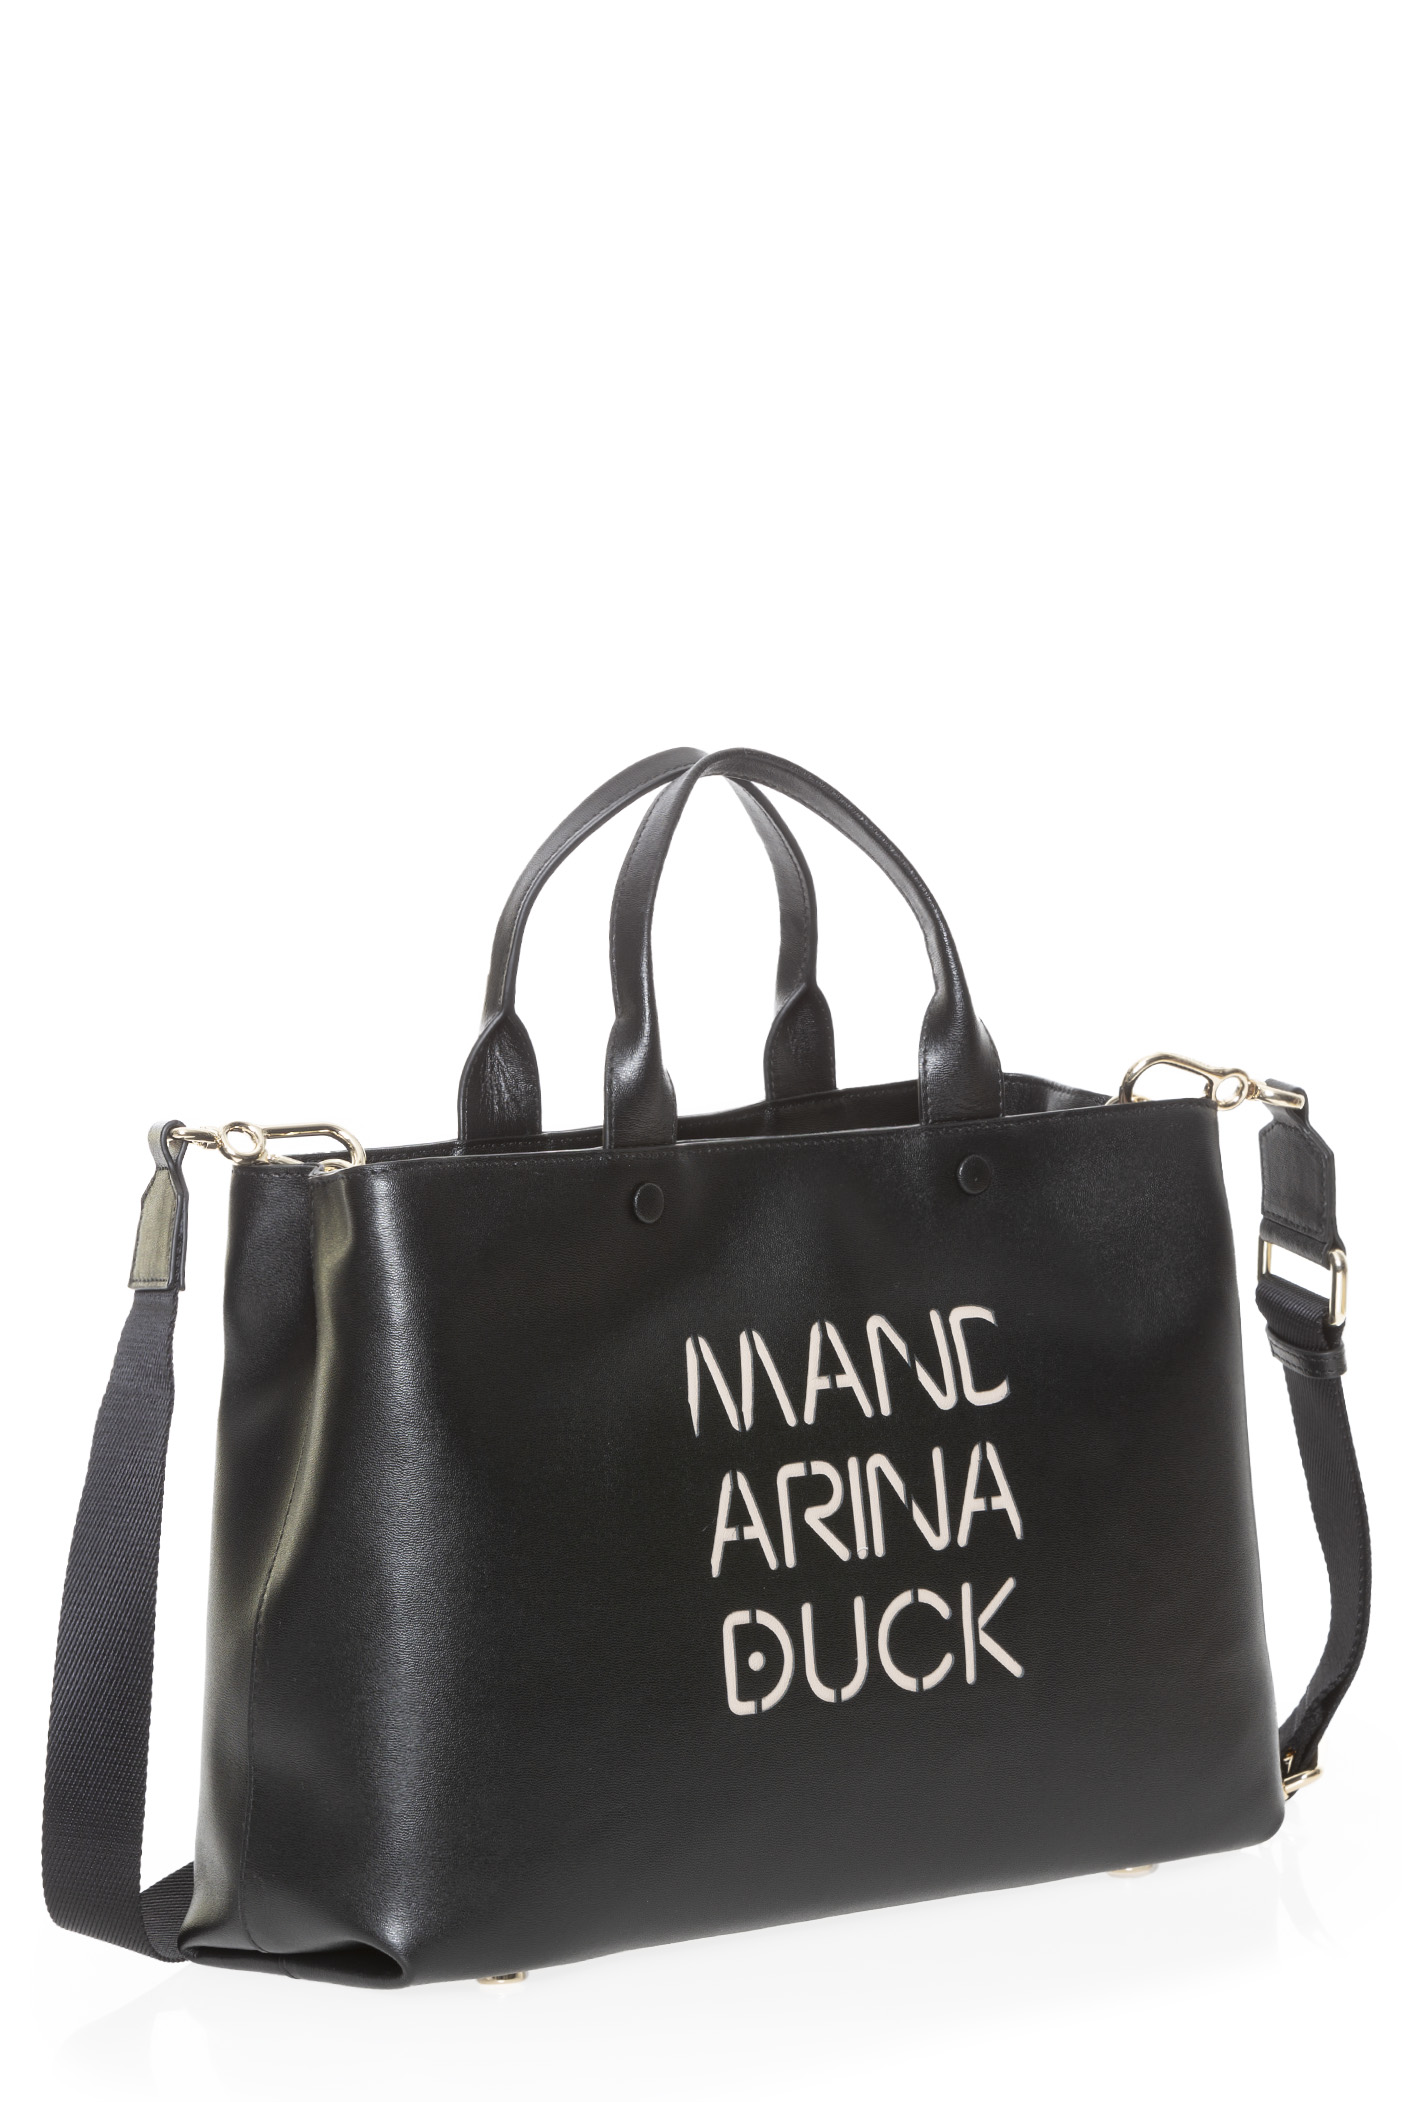 LADY DUCK TOTE